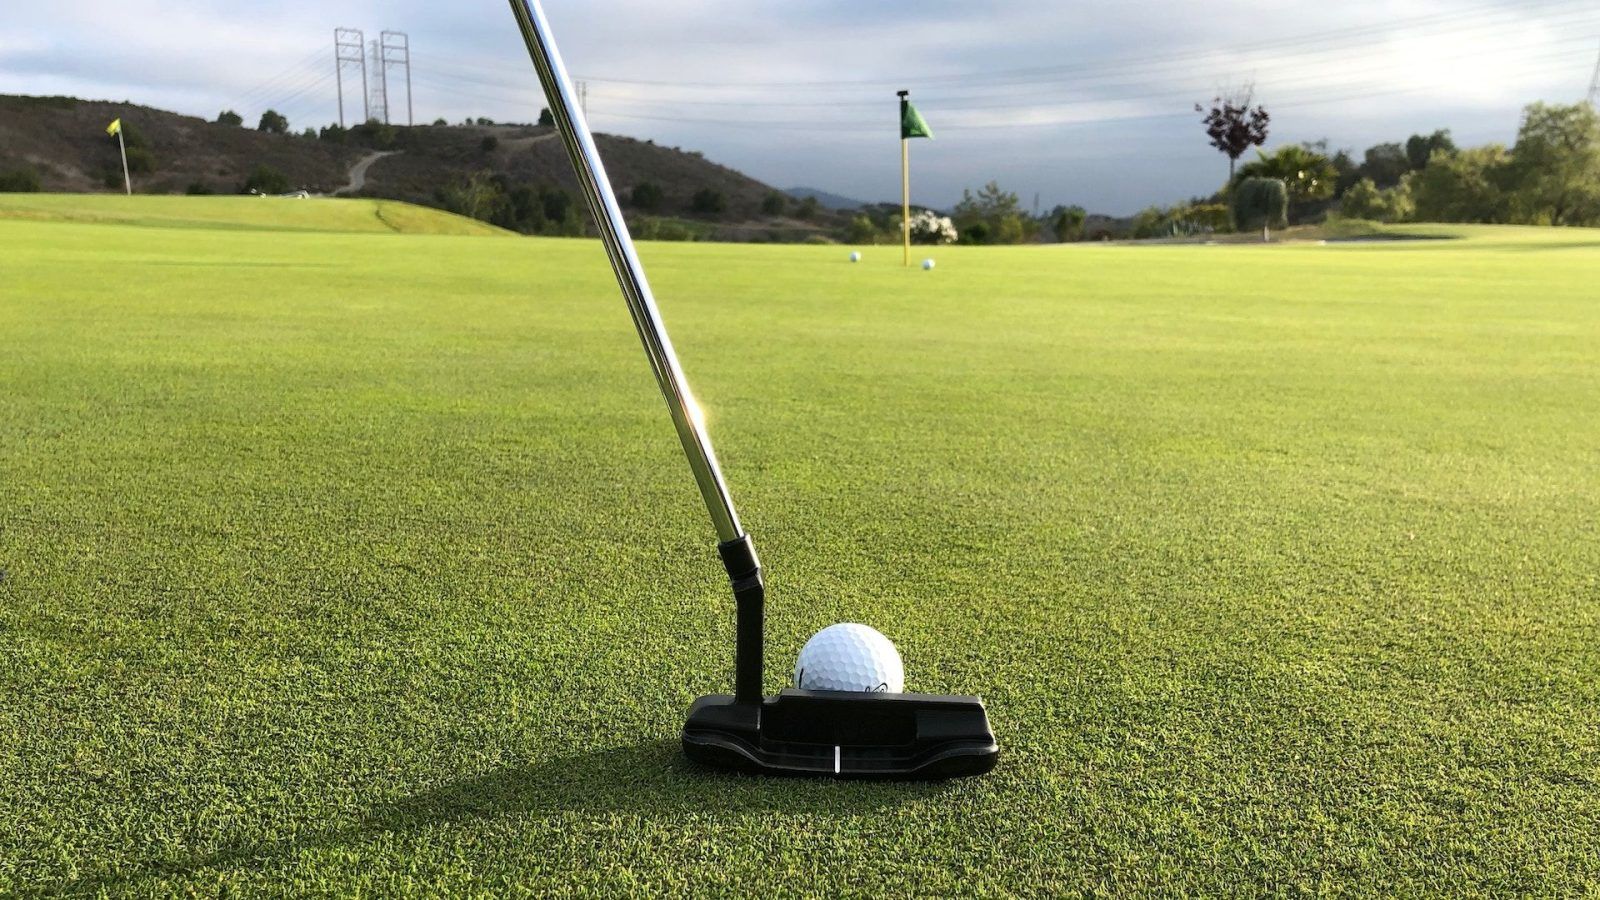 How to hit the sweet spot on your golf club every time